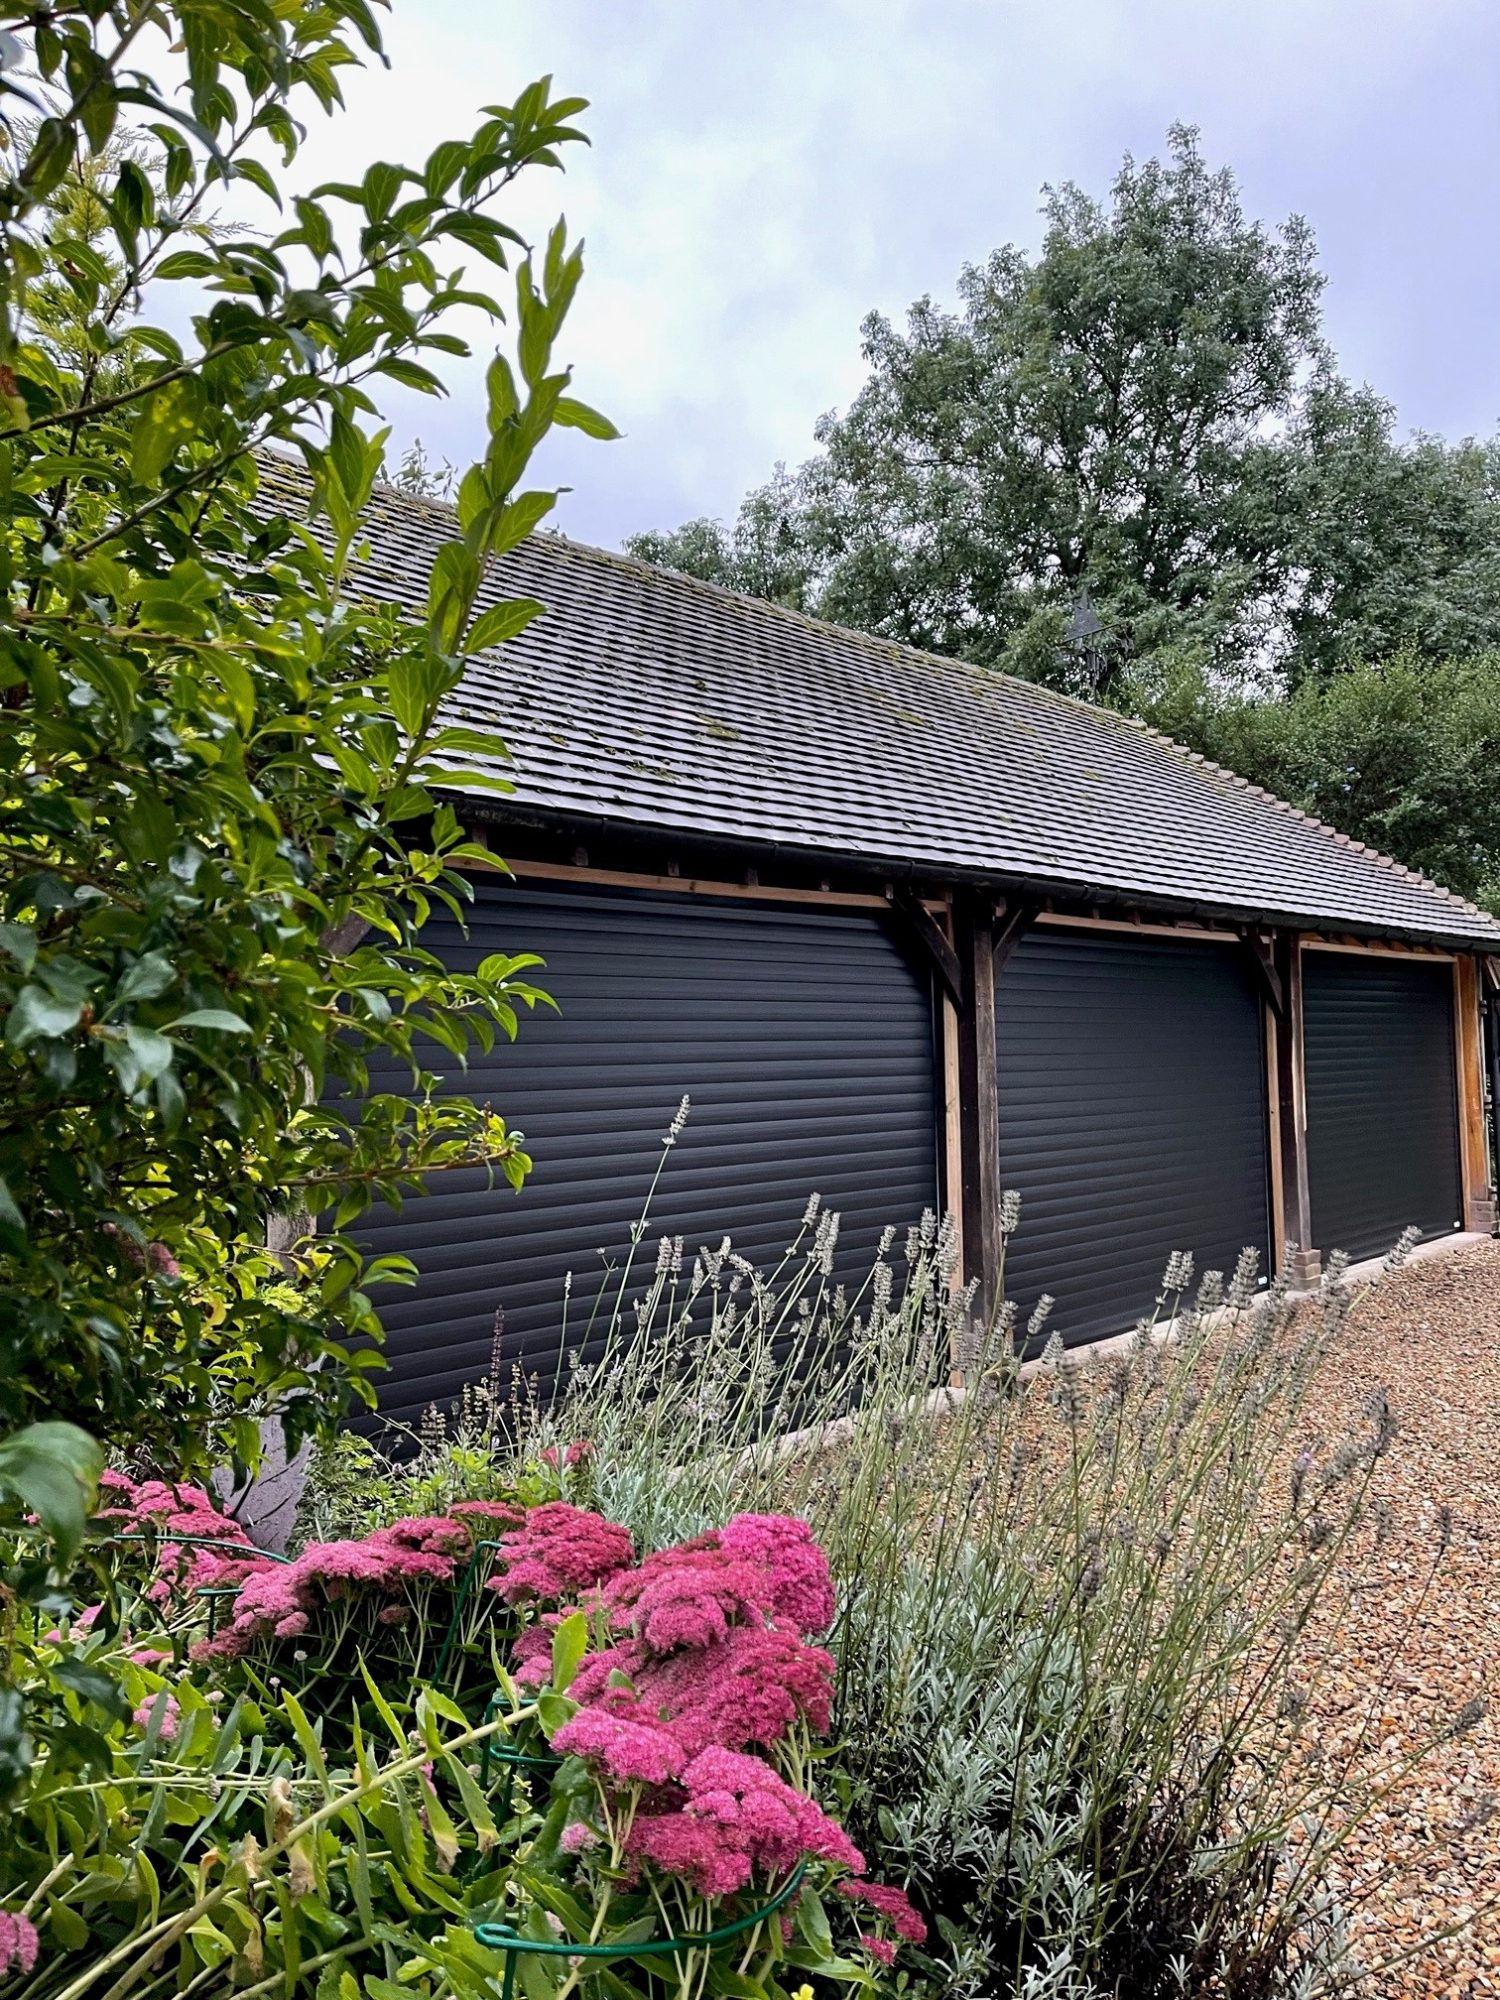 Detached garage building with three separate garage doors featuring black roller doors and summer flowers in the foreground.